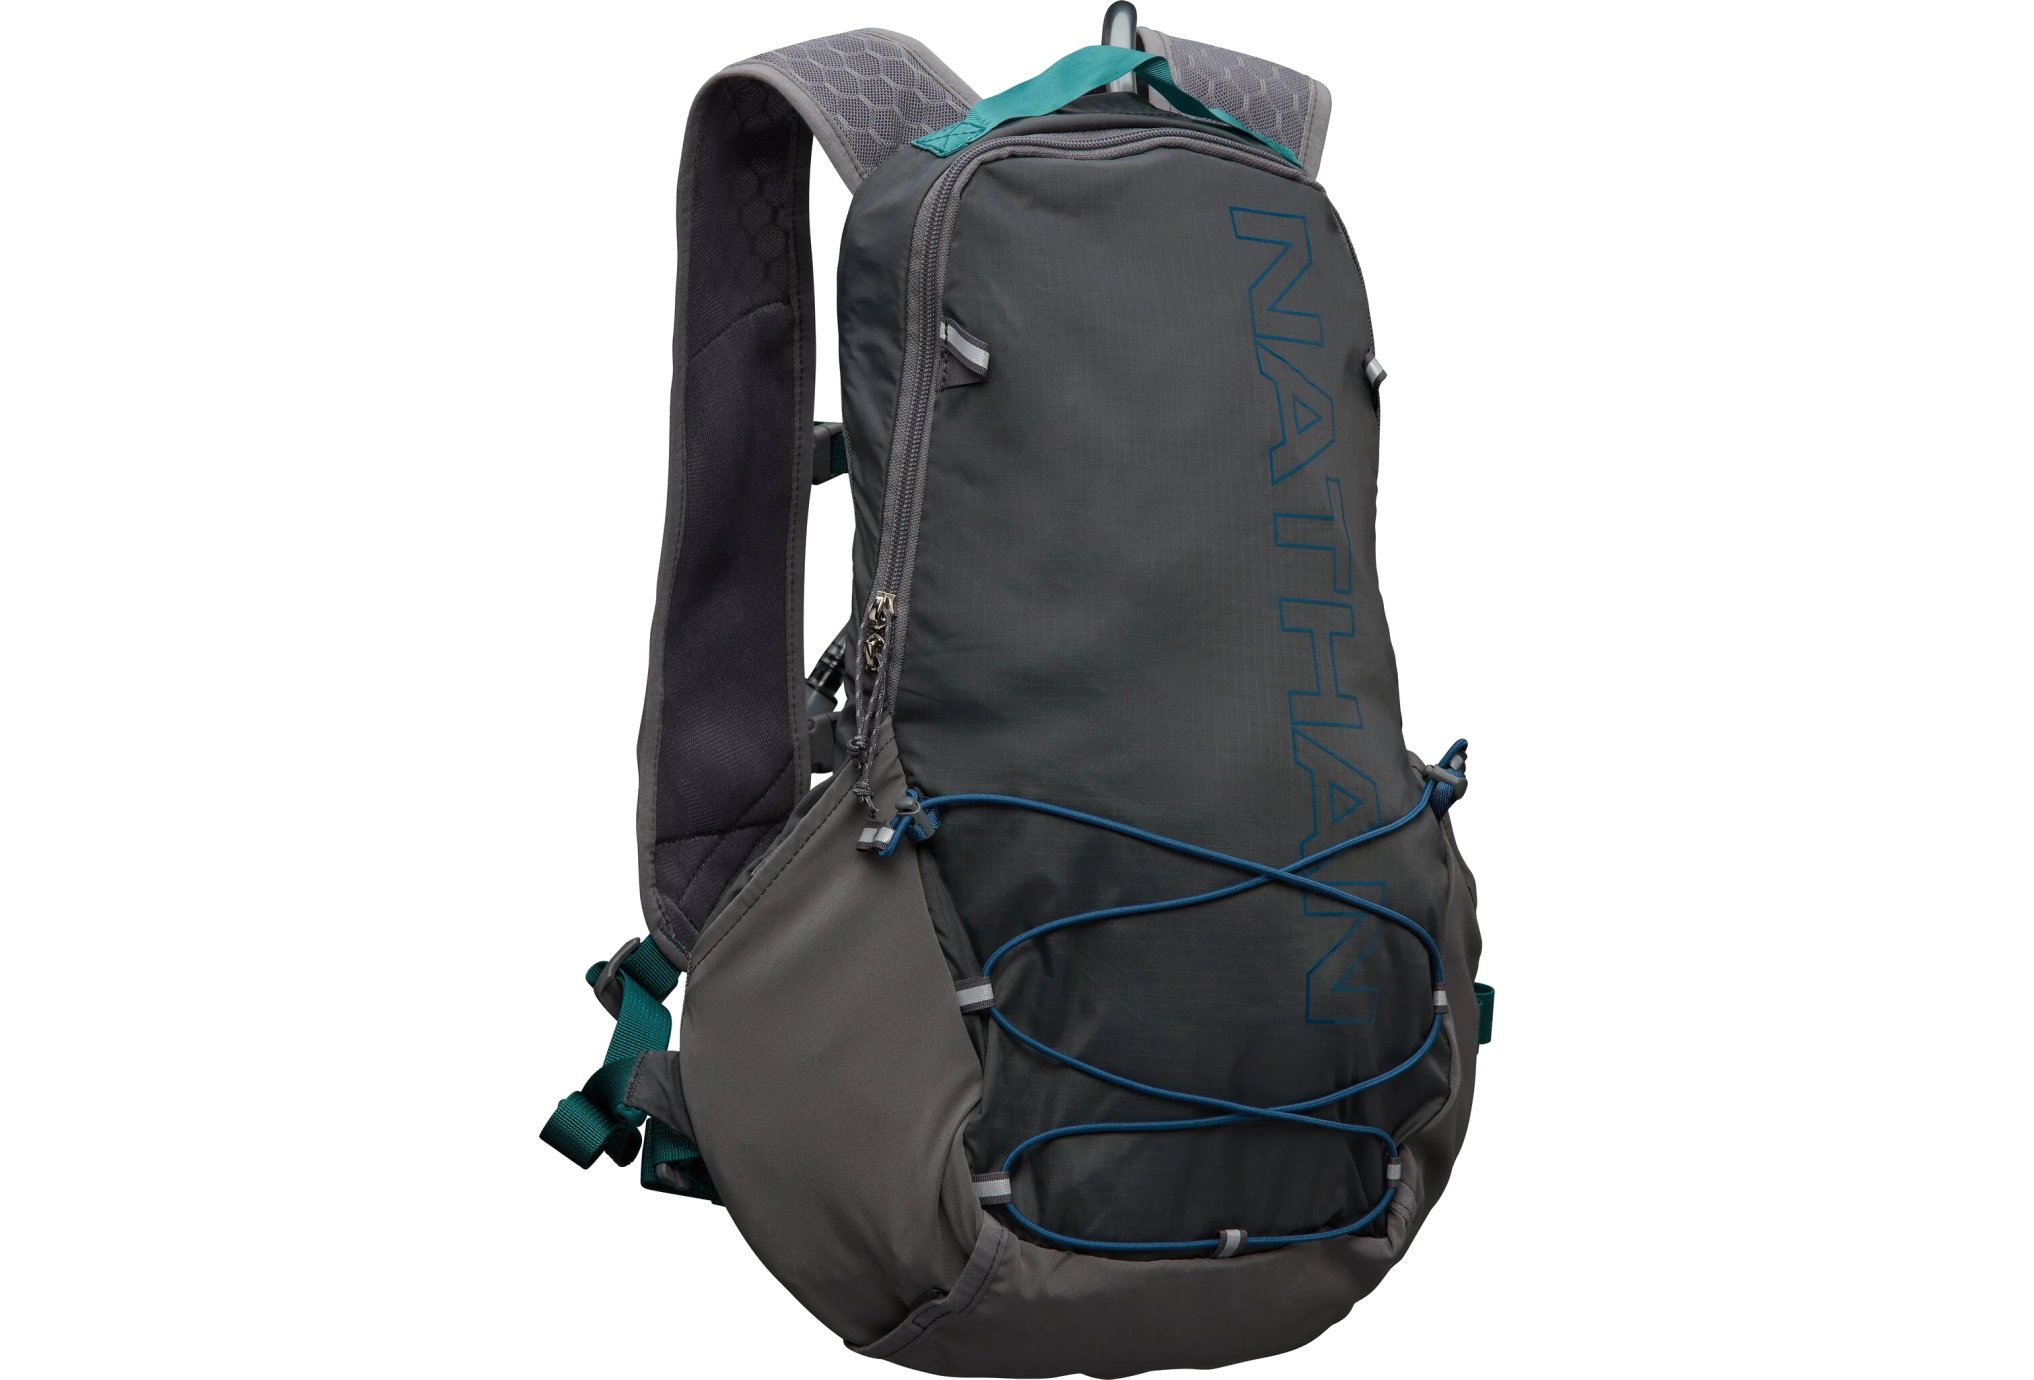 Nathan Crossover Pack 10L Sac hydratation / Gourde